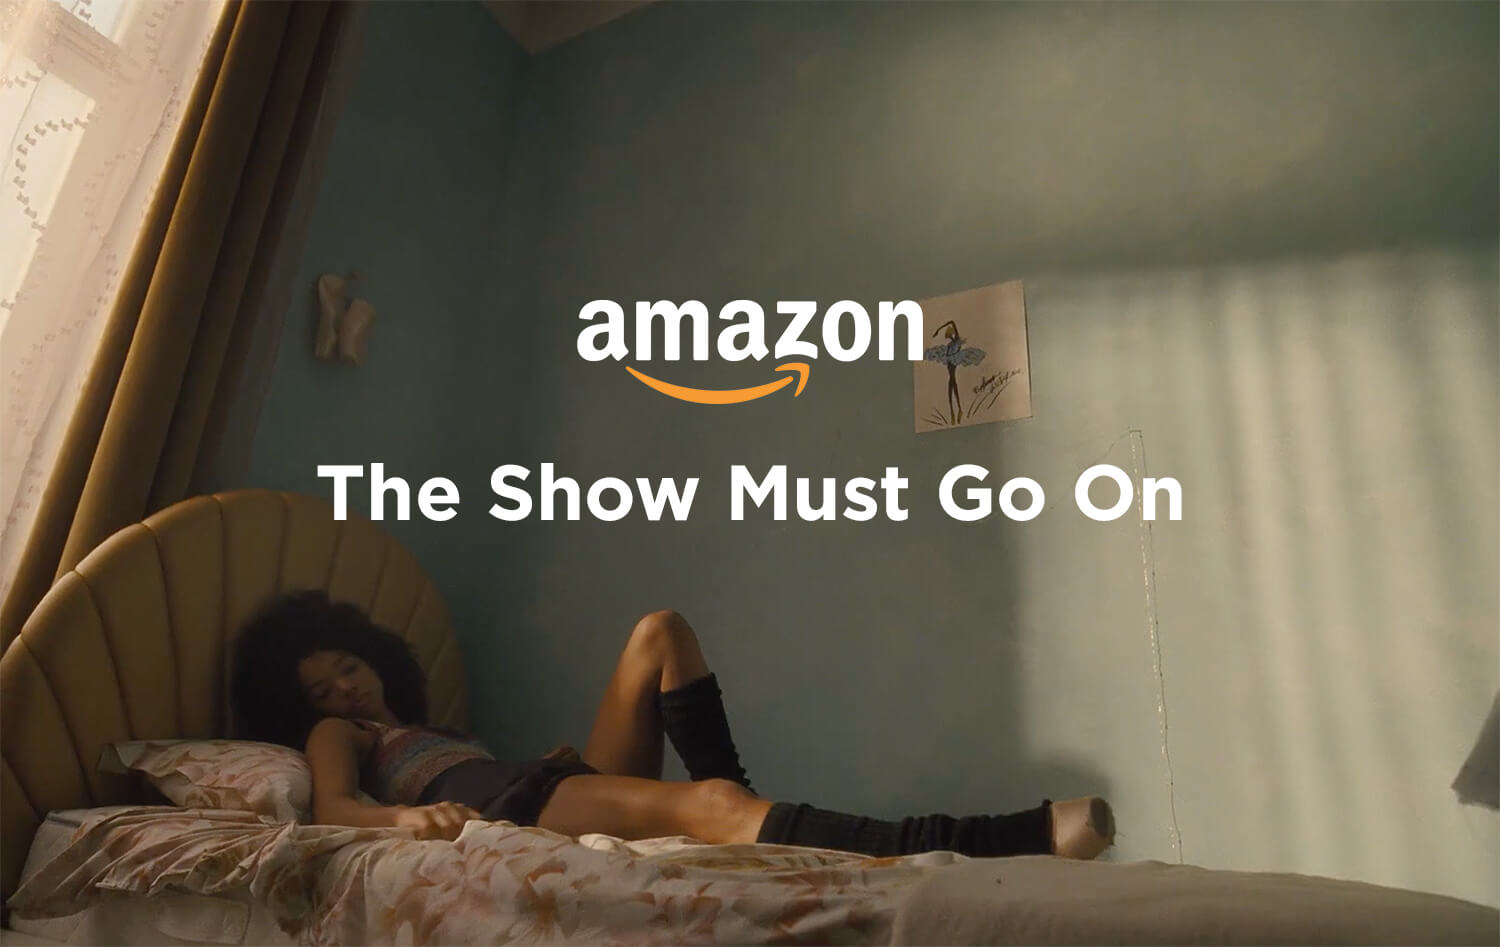 Amazon: The Show Must Go On